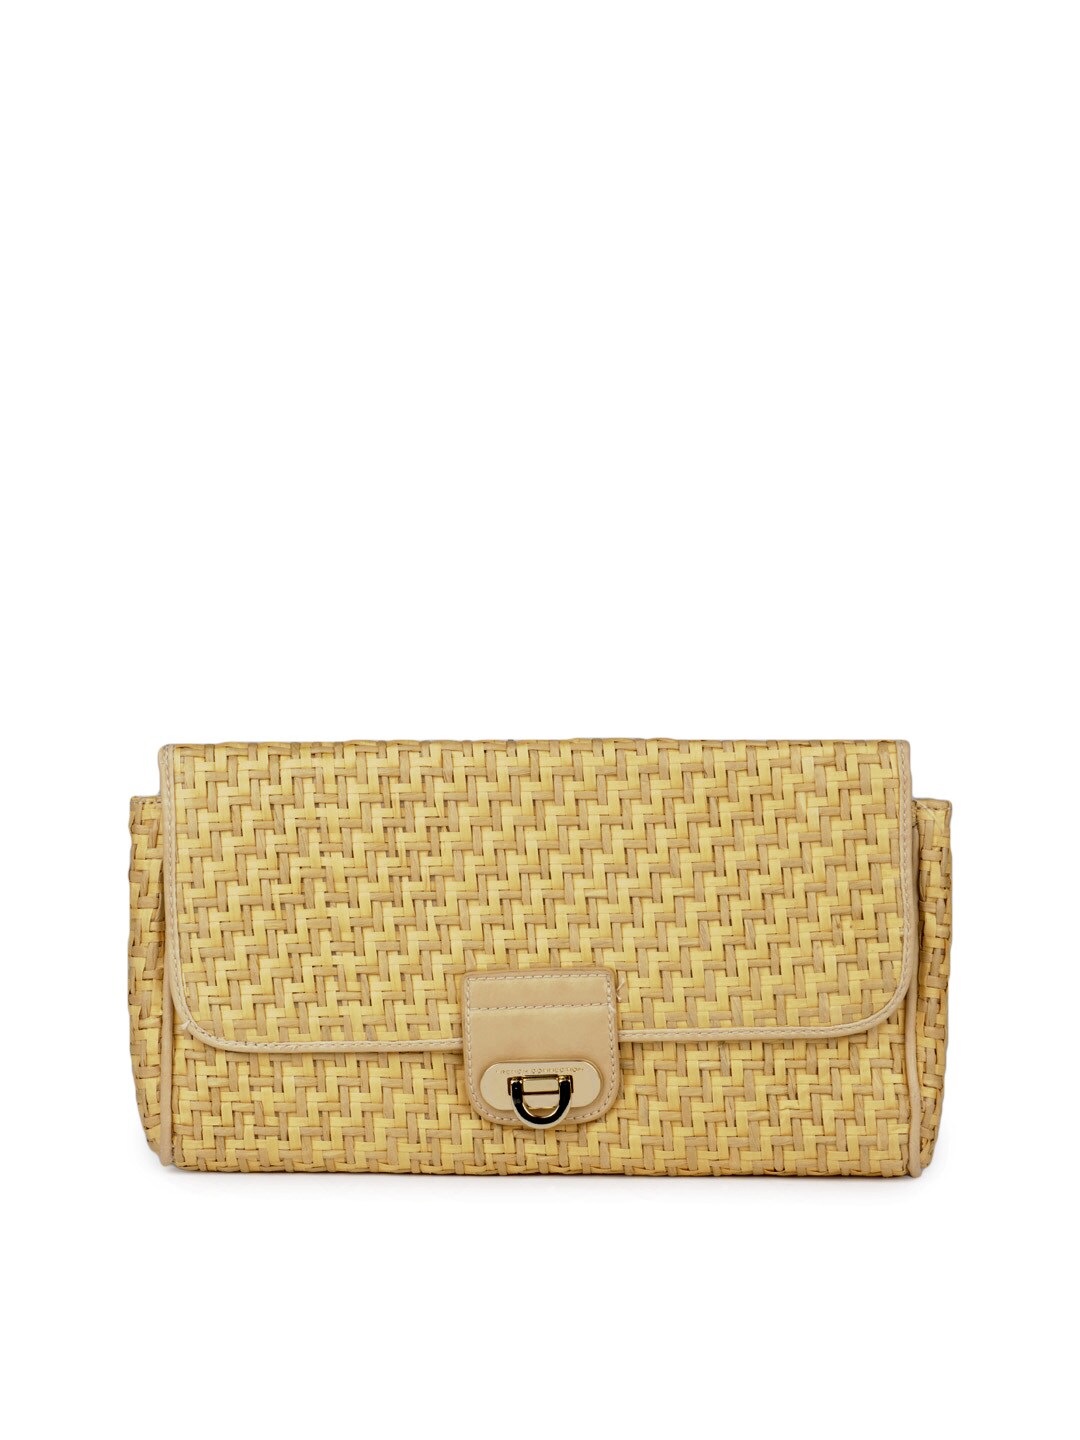 French Connection Women Beige Weave Clutch